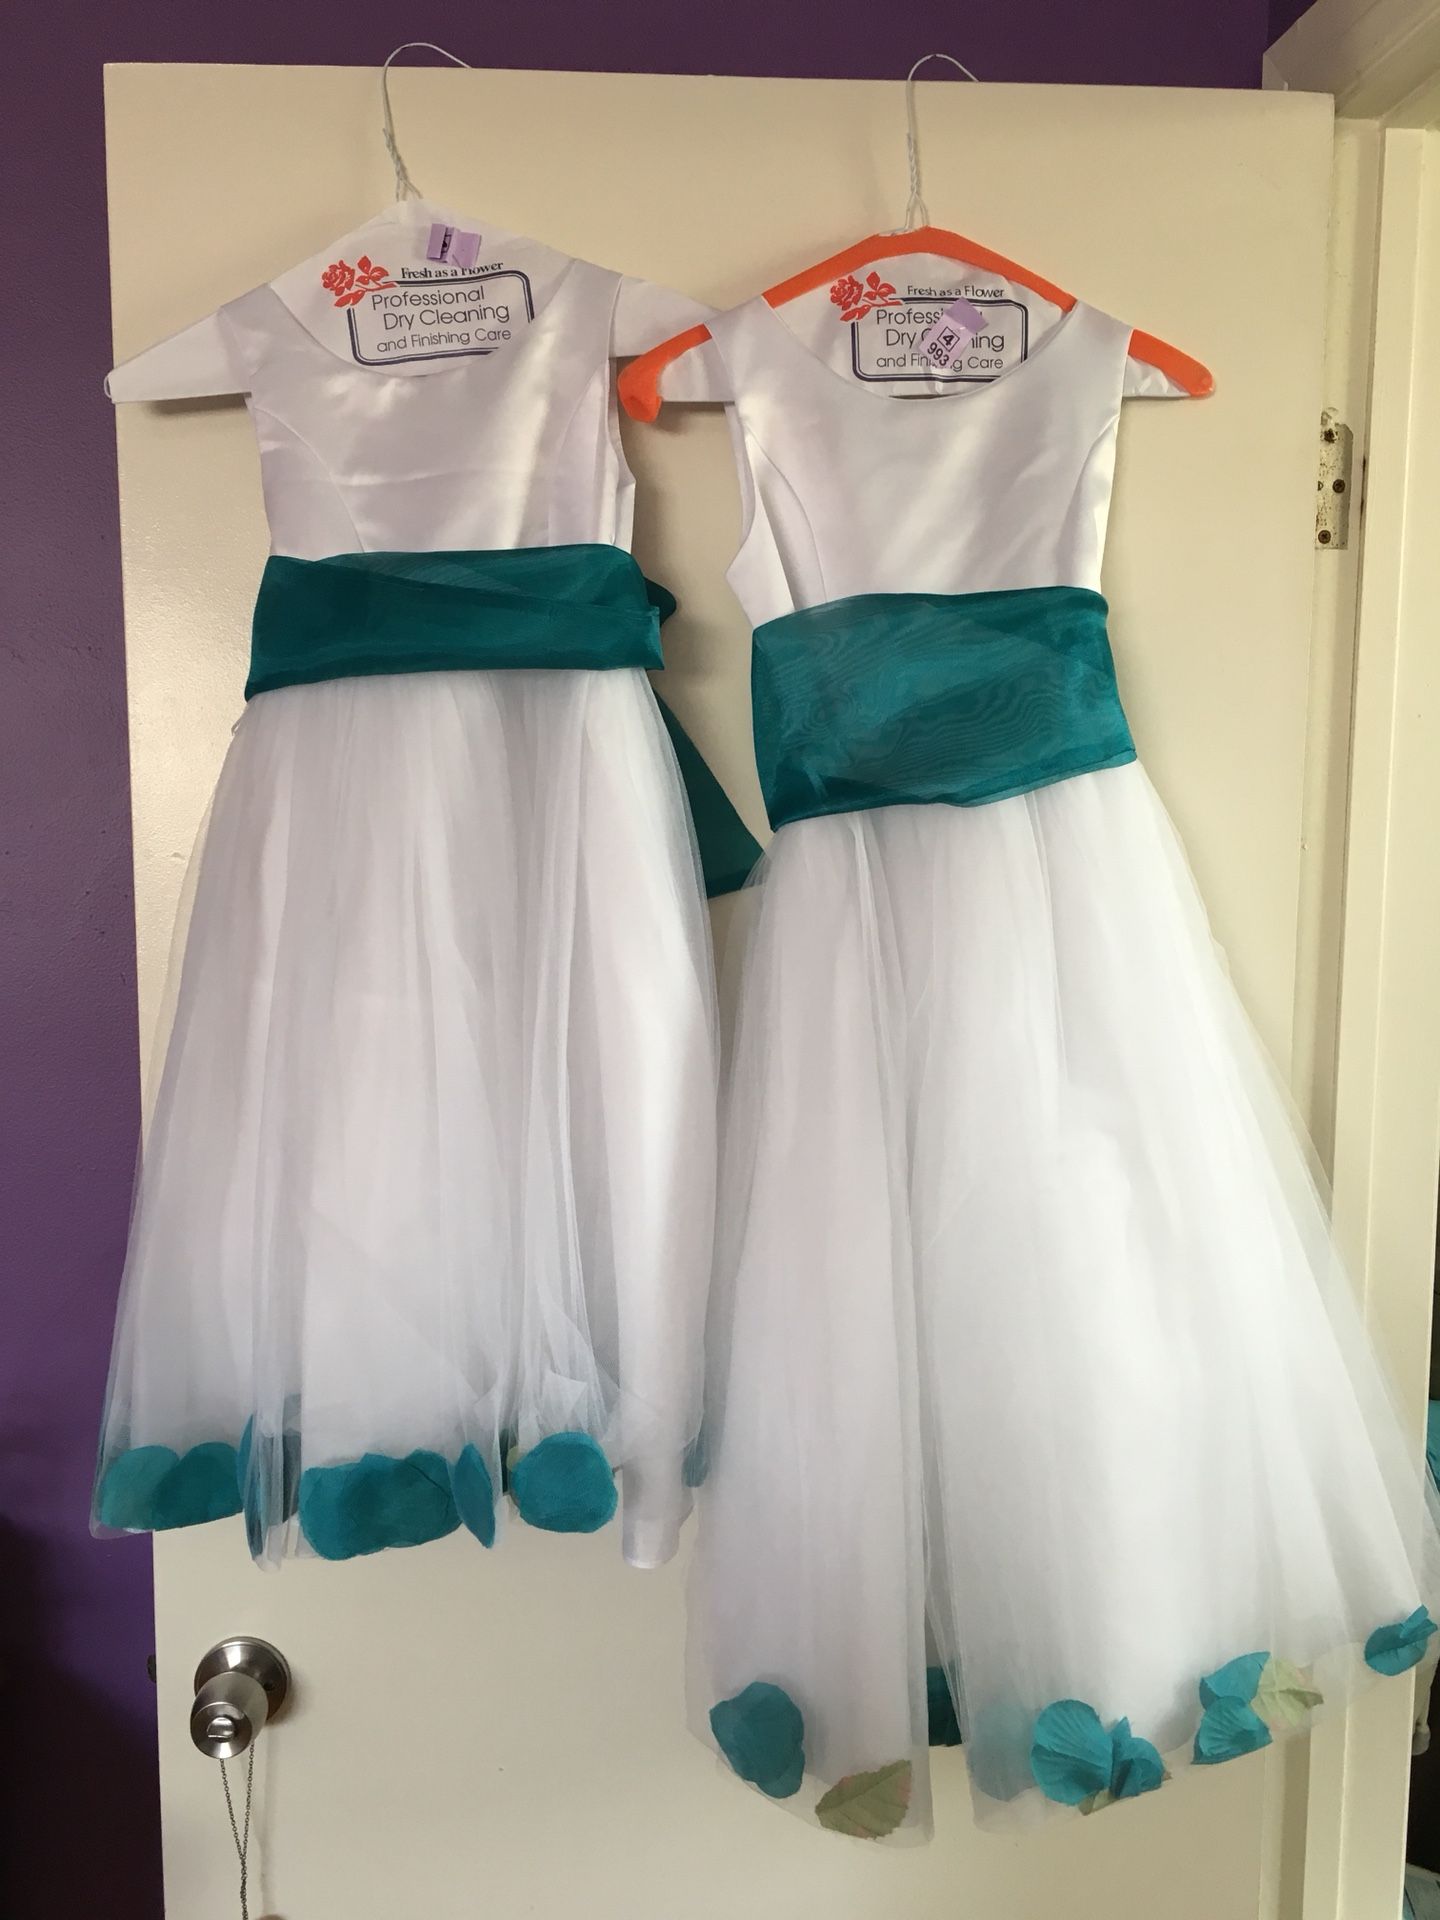 Matching flower girl dresses. Worn once. Size 6 and size 10.